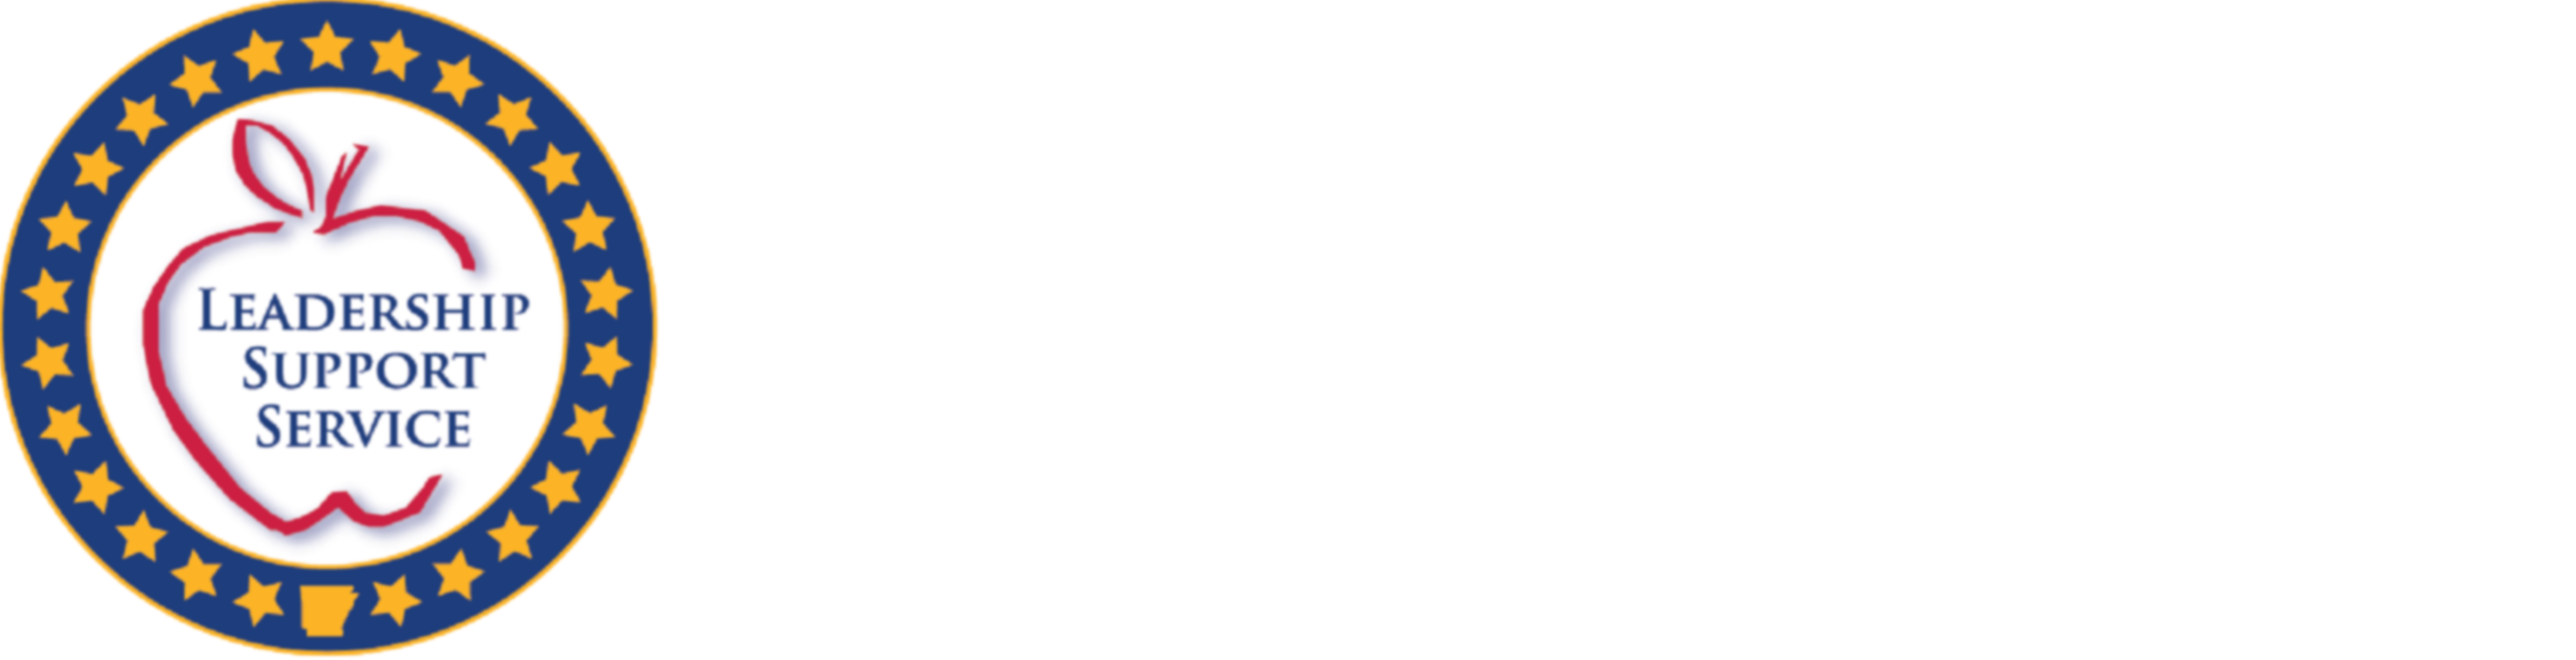 state required